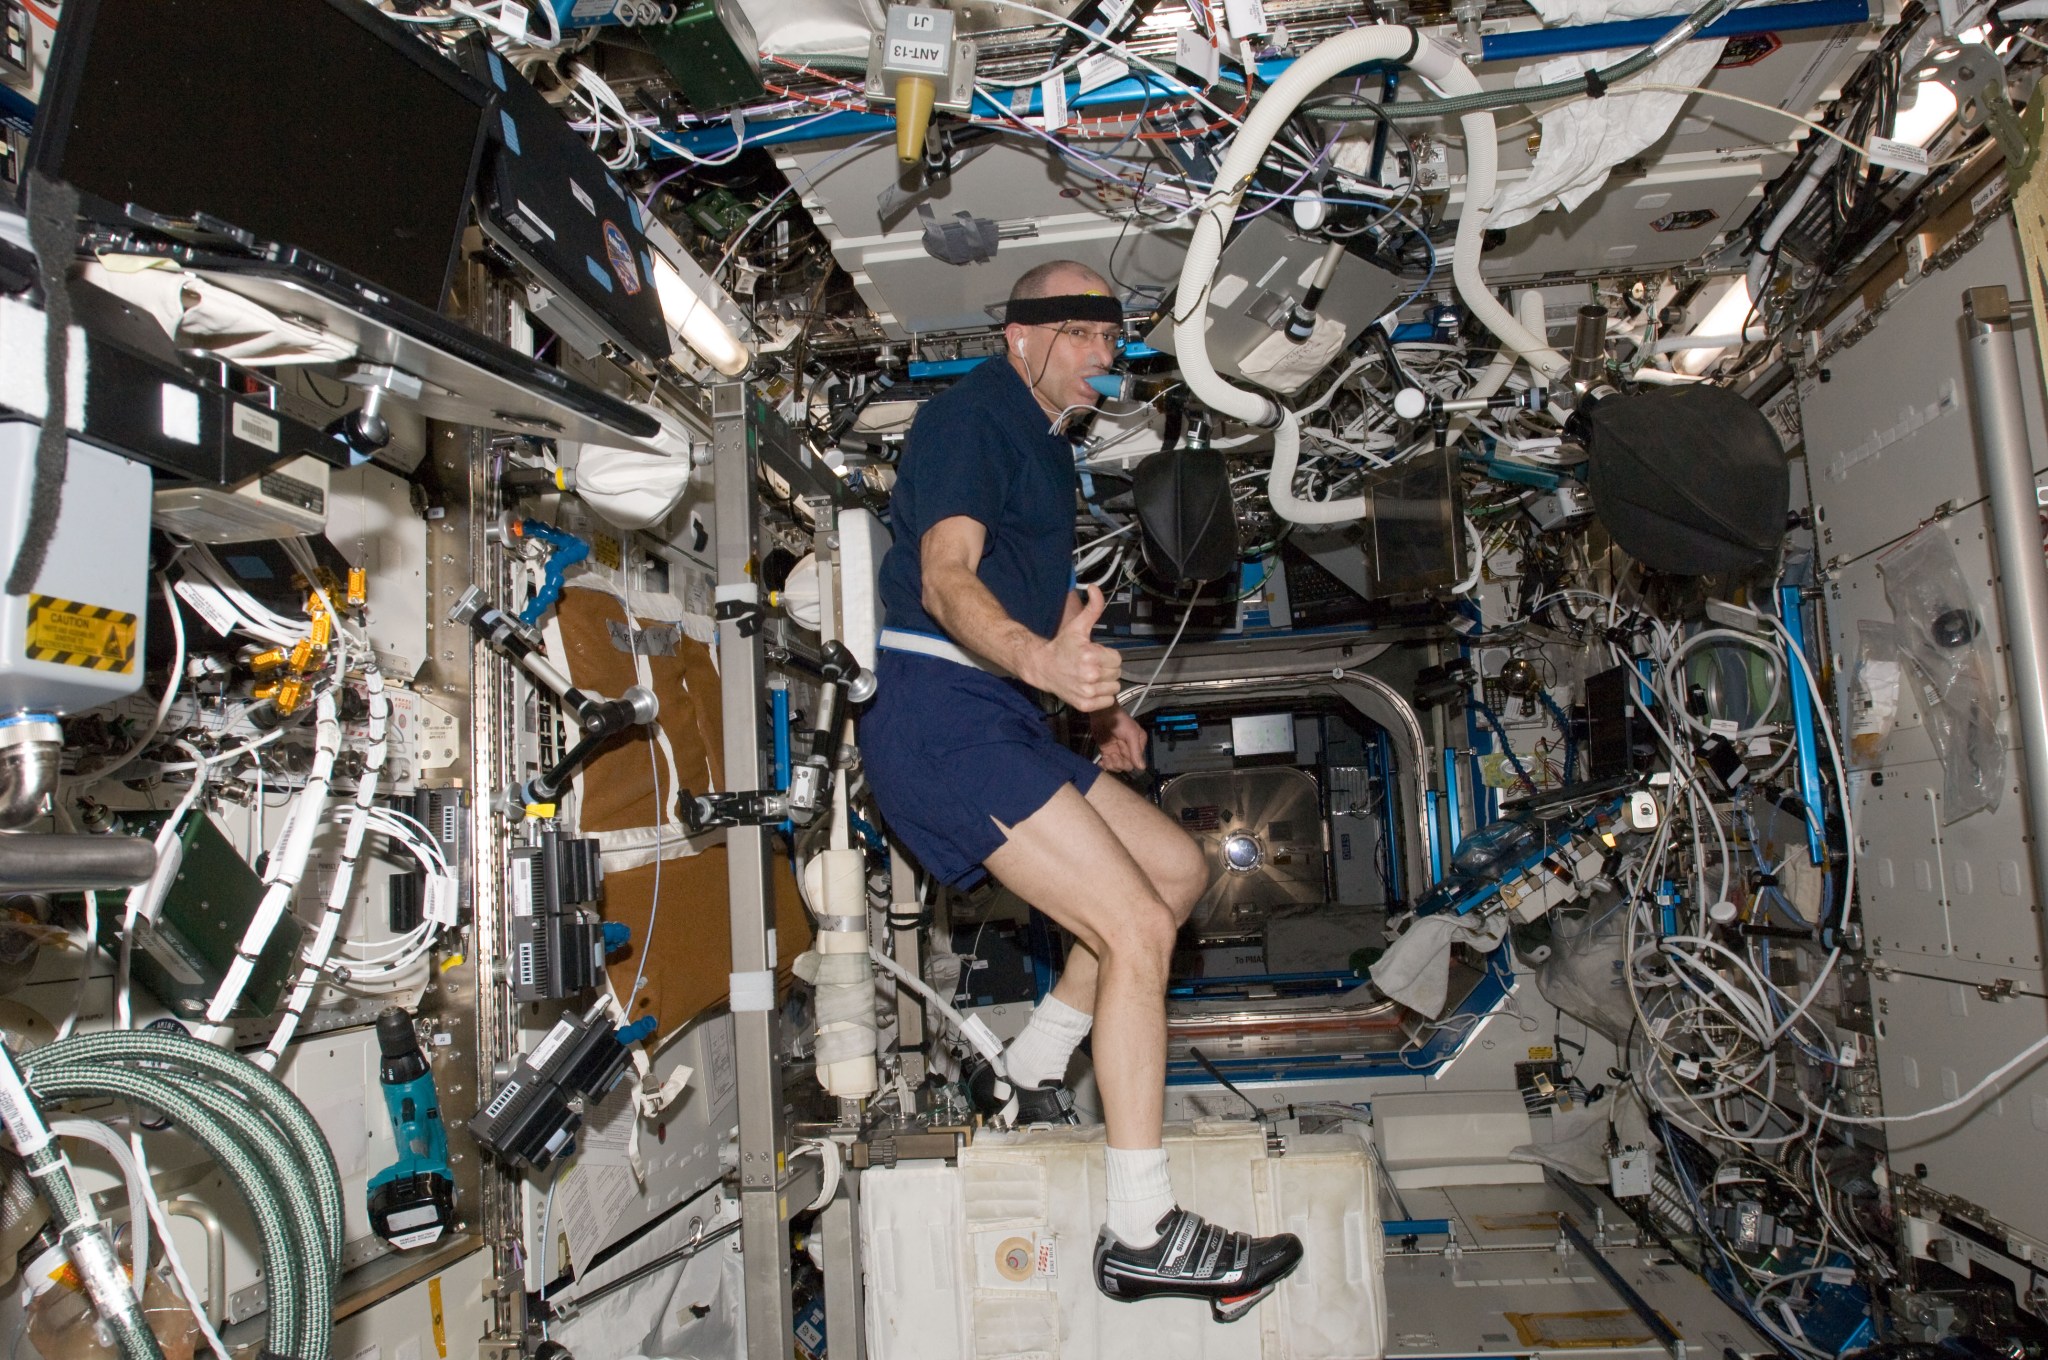 Pettit is wearing a blue t-shirt and shorts, earbuds, a head band, and black running shoes, giving a thumbs up from the station’s cycling machine, a white suitcase-sized box with bicycle pedals. Pettit holds a blue mouthpiece in his mouth attached to a tube that measures his oxygen uptake. The walls of the station around him are covered with equipment, laptops, hoses, and cords.